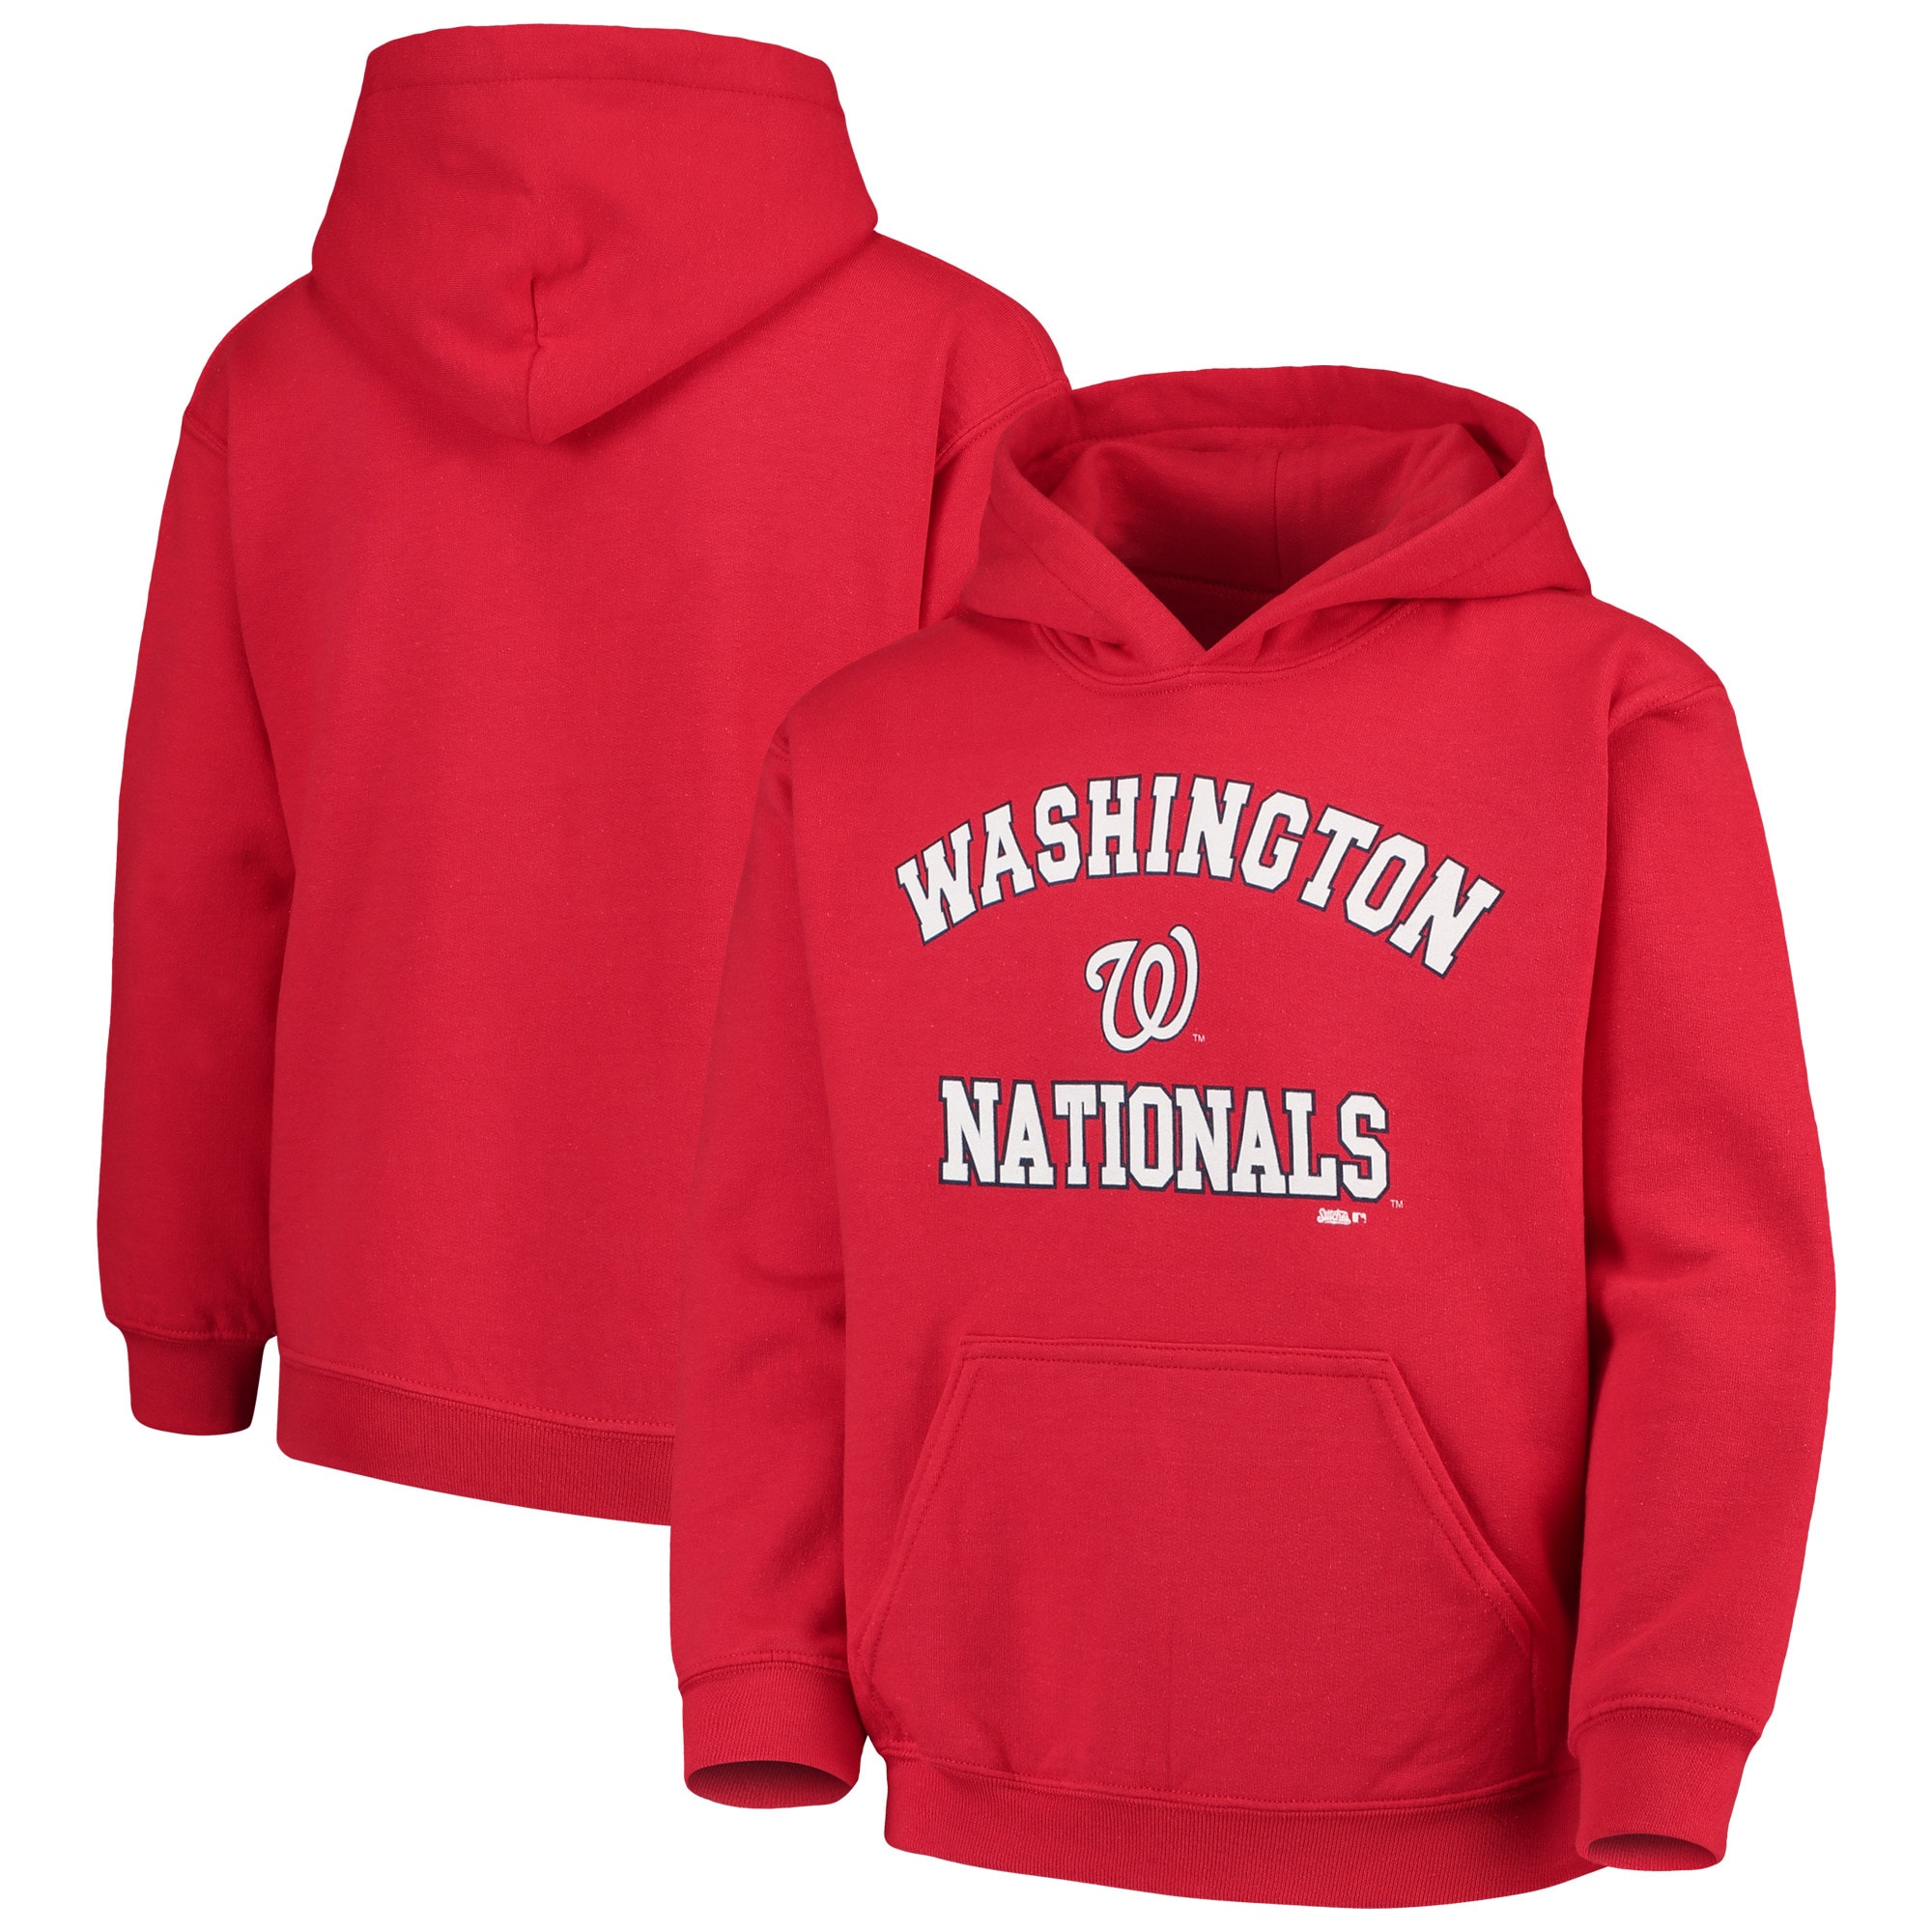 Youth Washington Nationals Stitches Red Fleece Pullover Hoodie